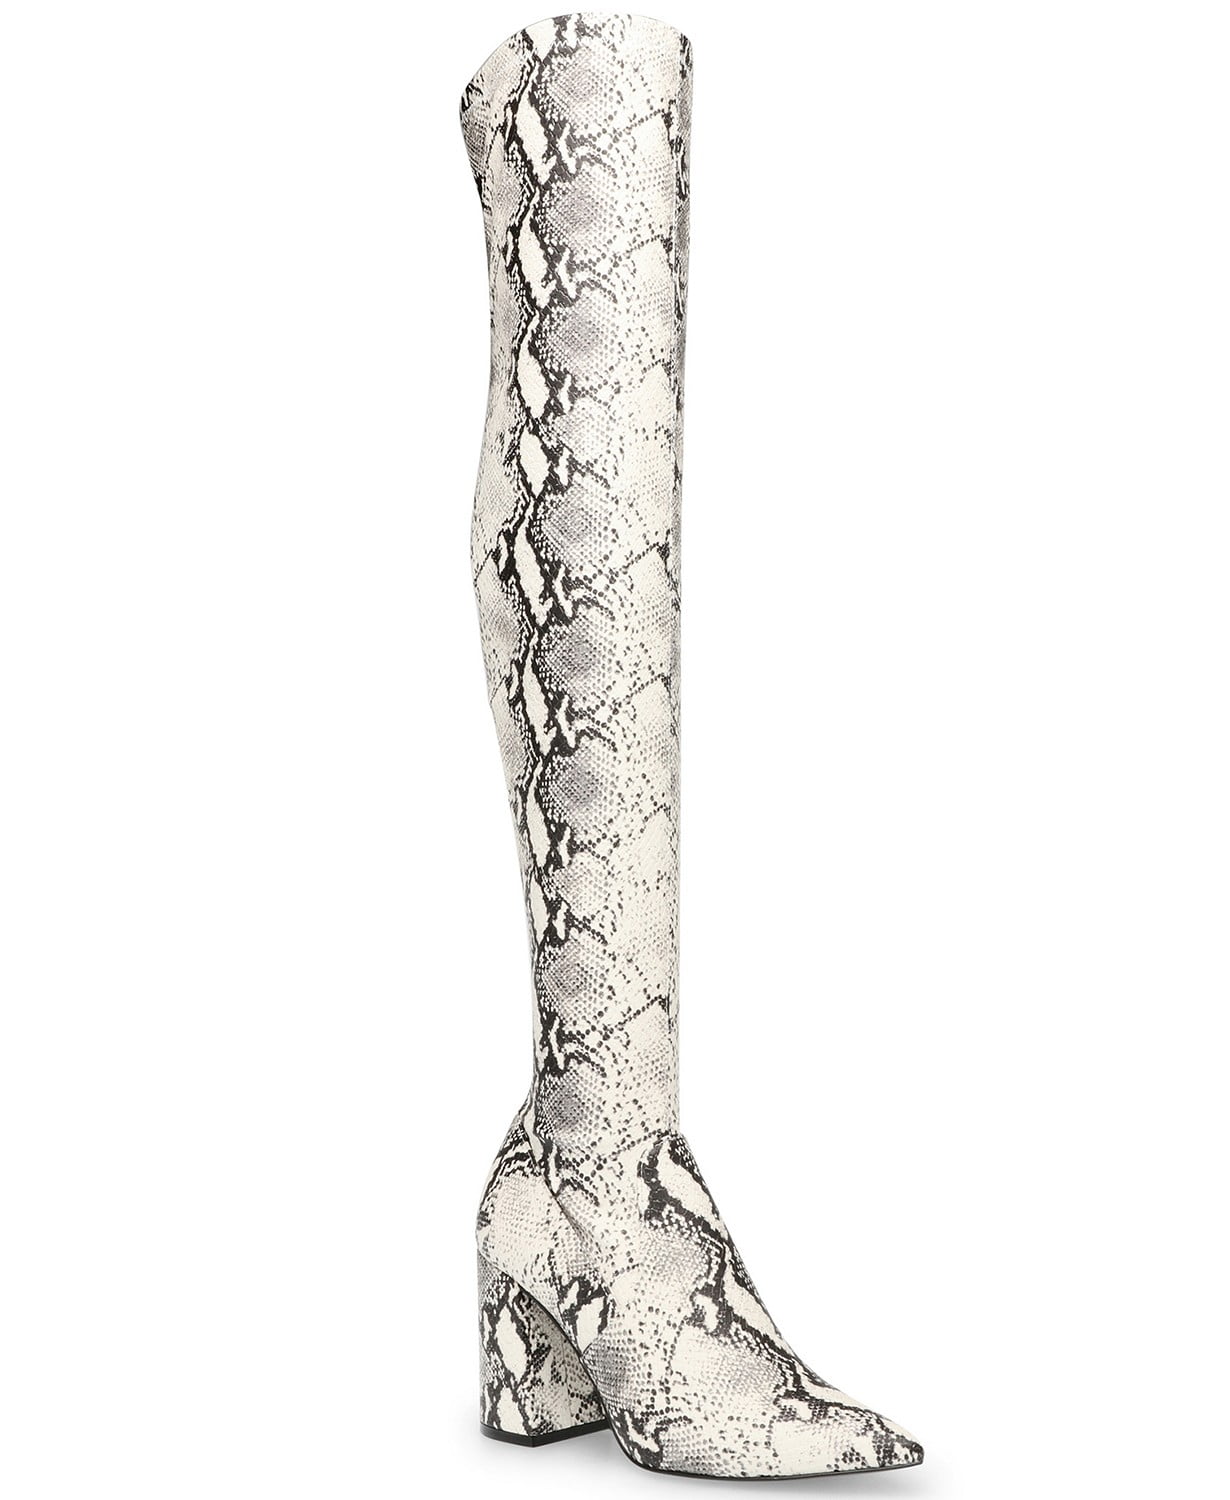 woocommerce-673321-2209615.cloudwaysapps.com-steve-madden-womens-snake-print-jacoby-thigh-high-over-the-knee-boots